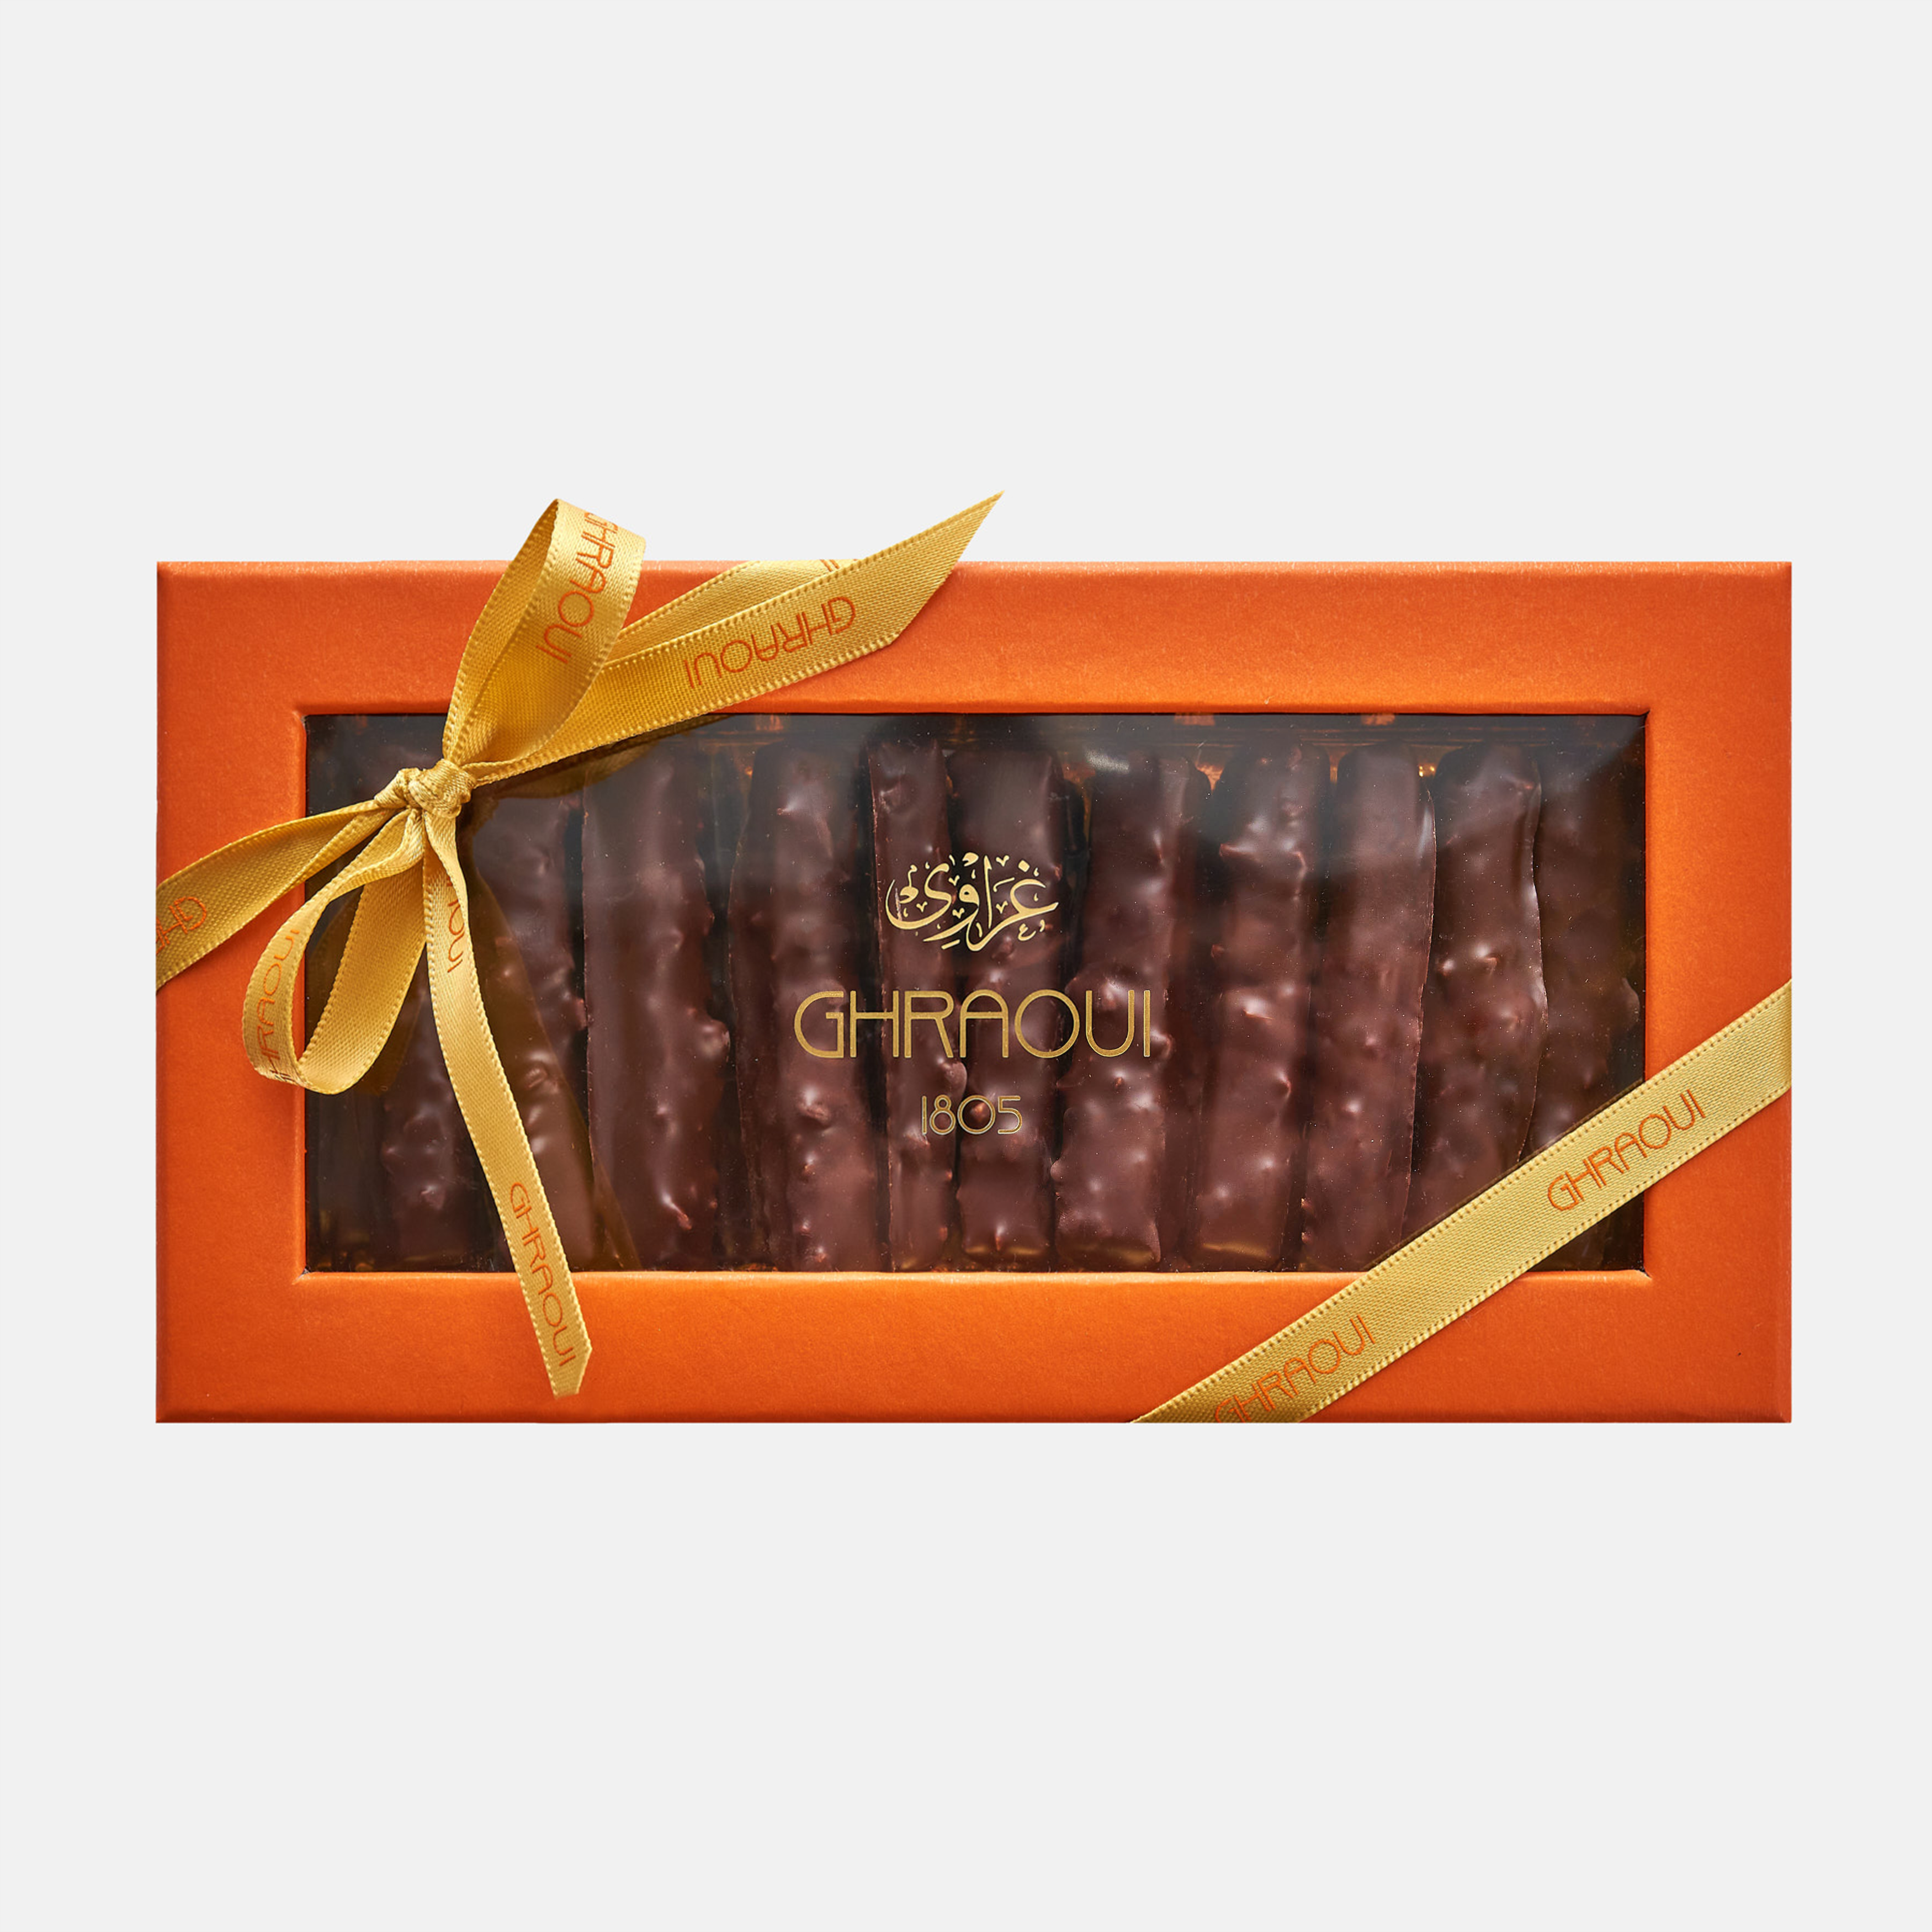 Candied orange peel with almond pieces - ghraoui-chocolate Edit alt text